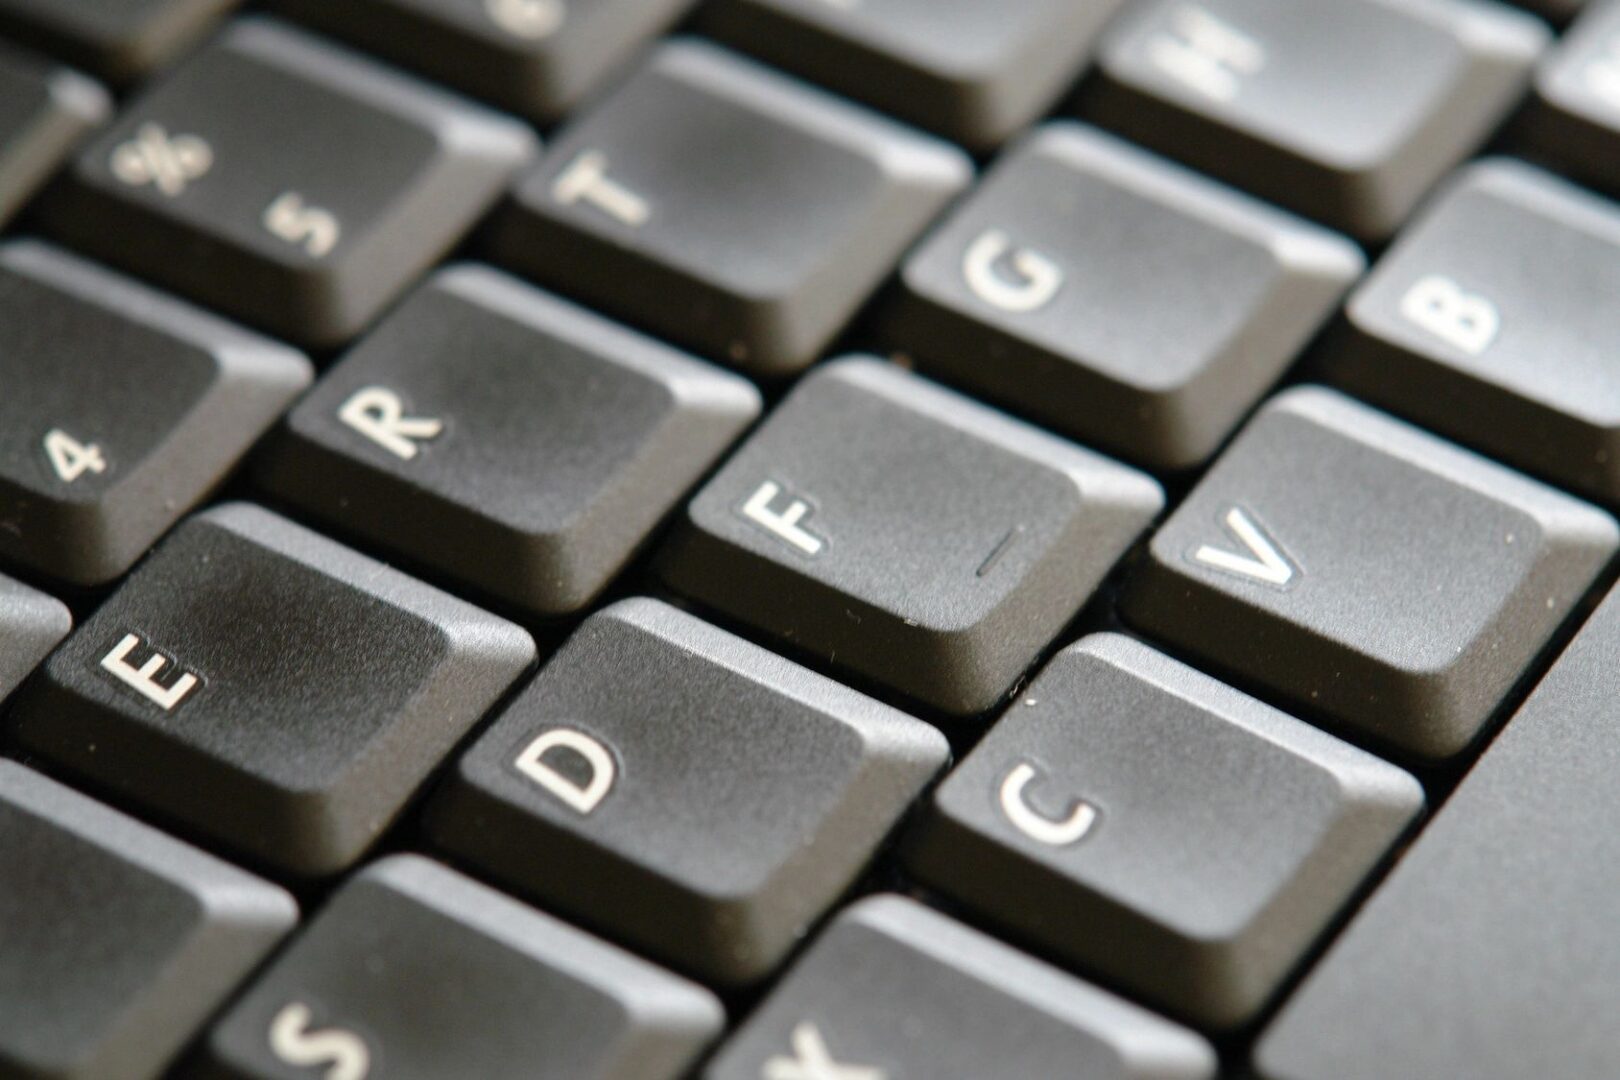 A close up of the keys on a keyboard